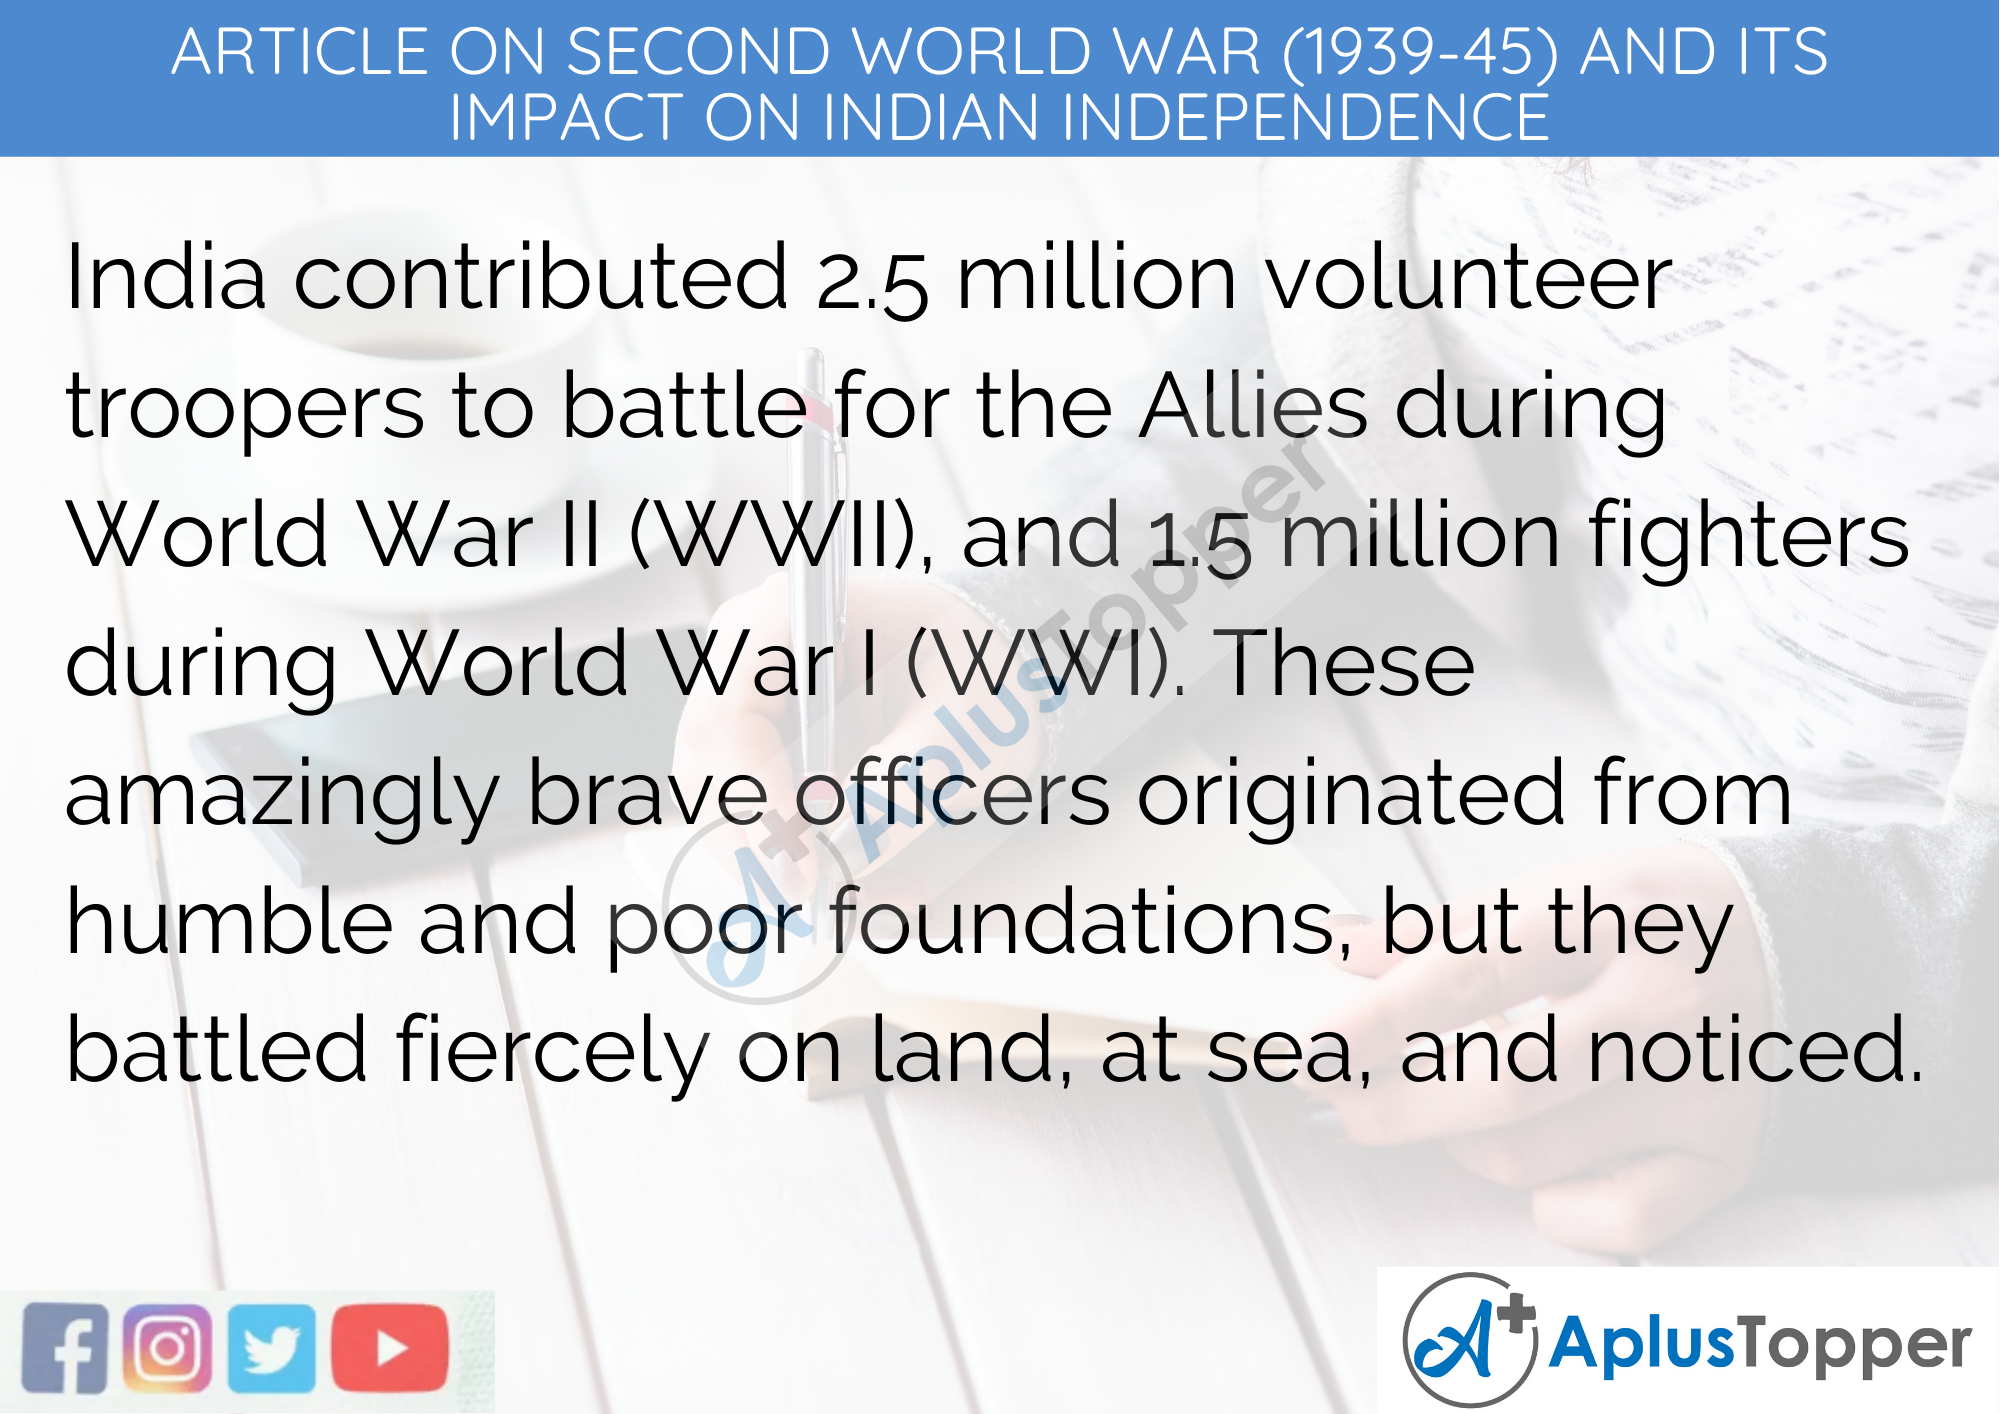 Short Article On Second World War (1939-45) and its Impact on Indian Independence 300 Words in English